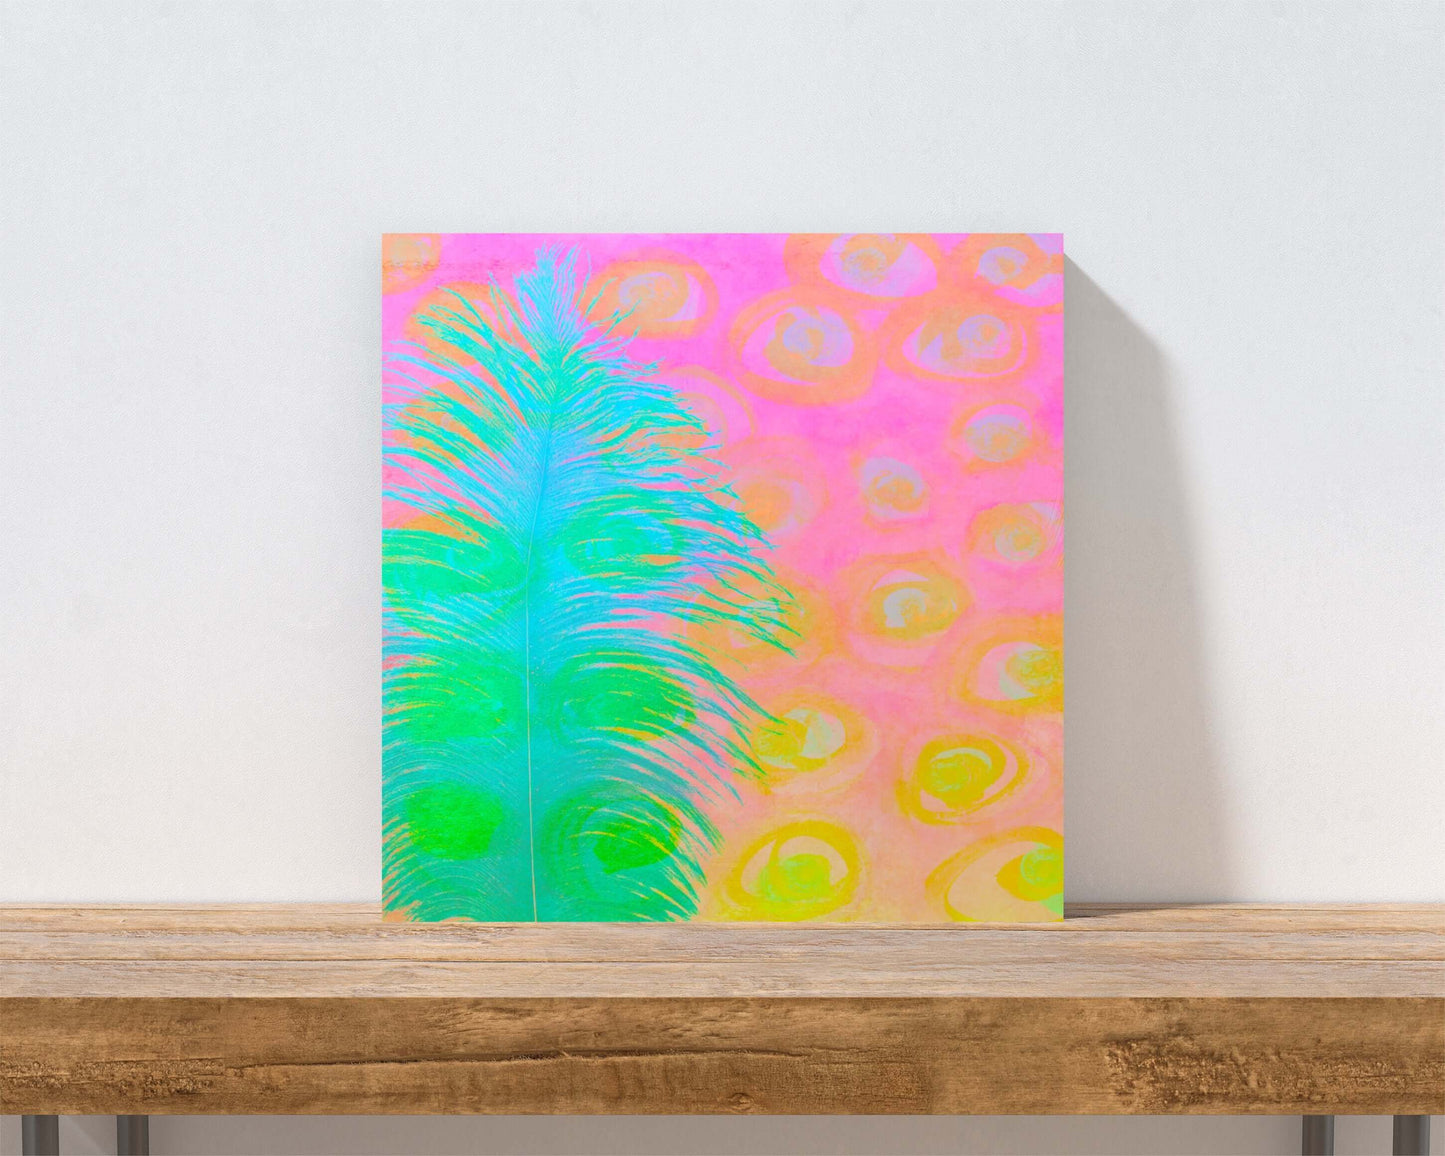 Bright Blue-Green Ostrich Feather on Pink and Yellow Background “My Other Half” Abstract Art Canvas Print Wall Art Small Canvas on Shelf